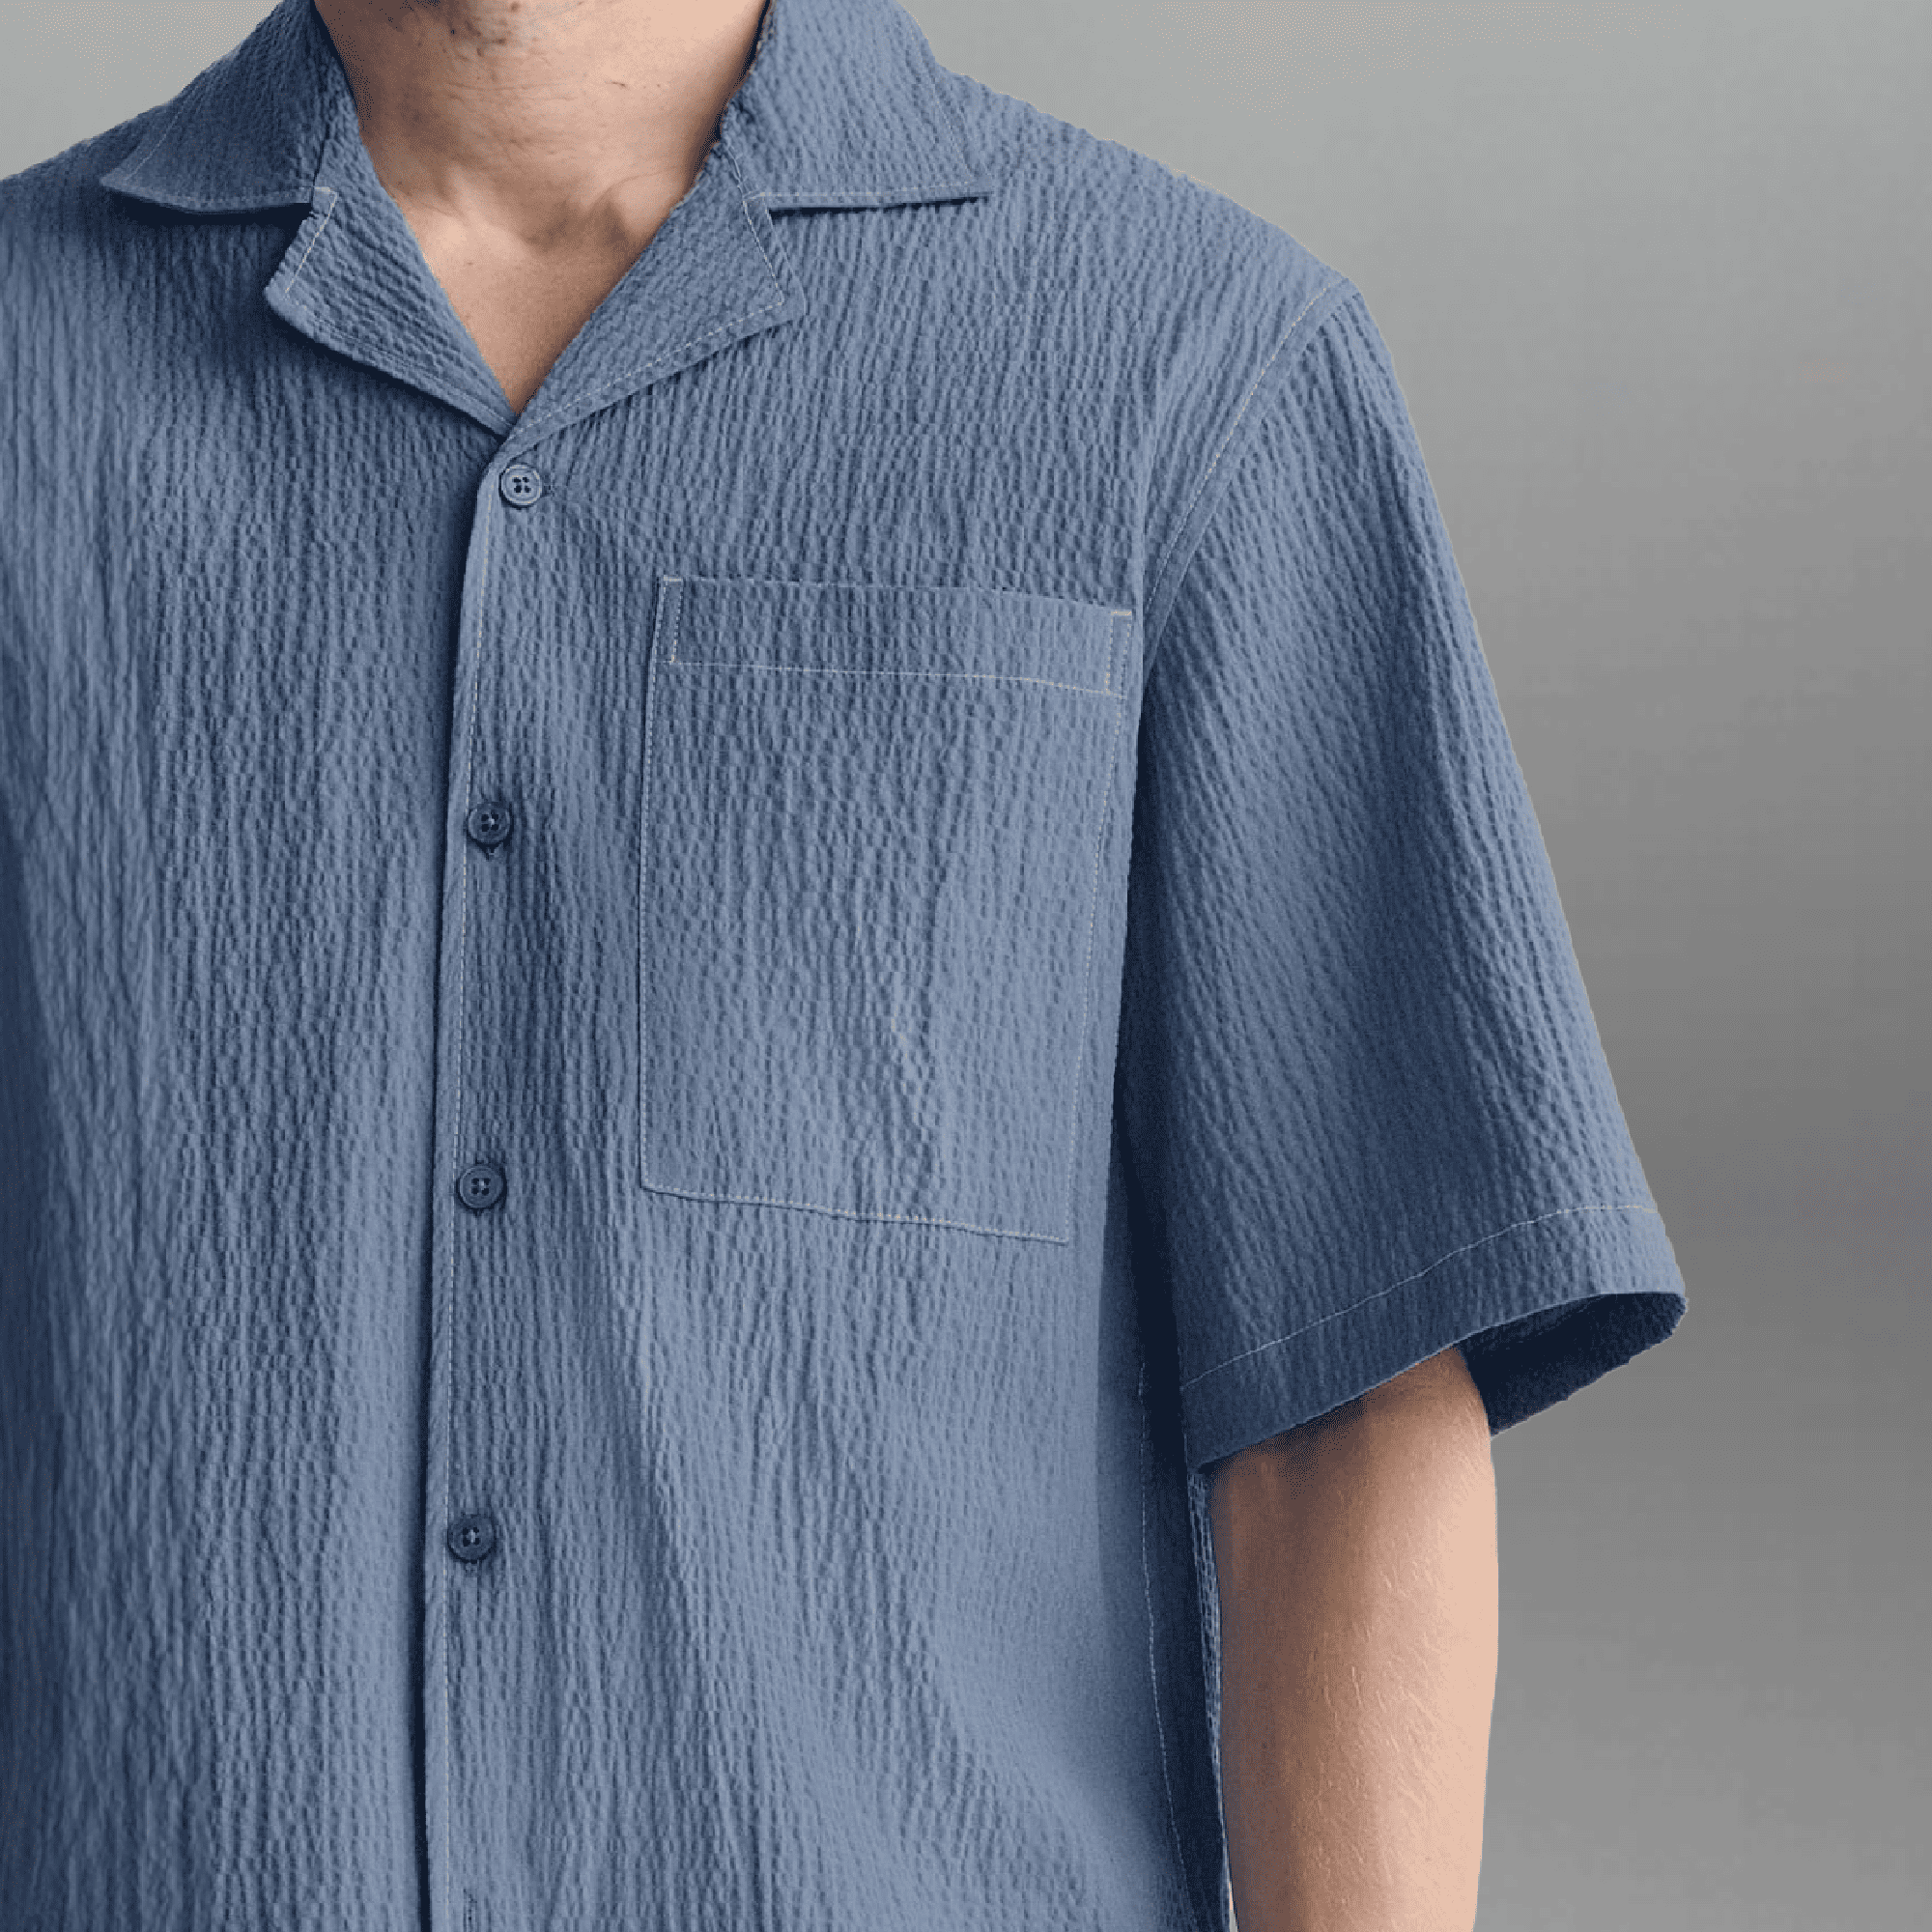 Men's Blue Textured Oversized Camp Collar Shirt with a Pocket-RMS044